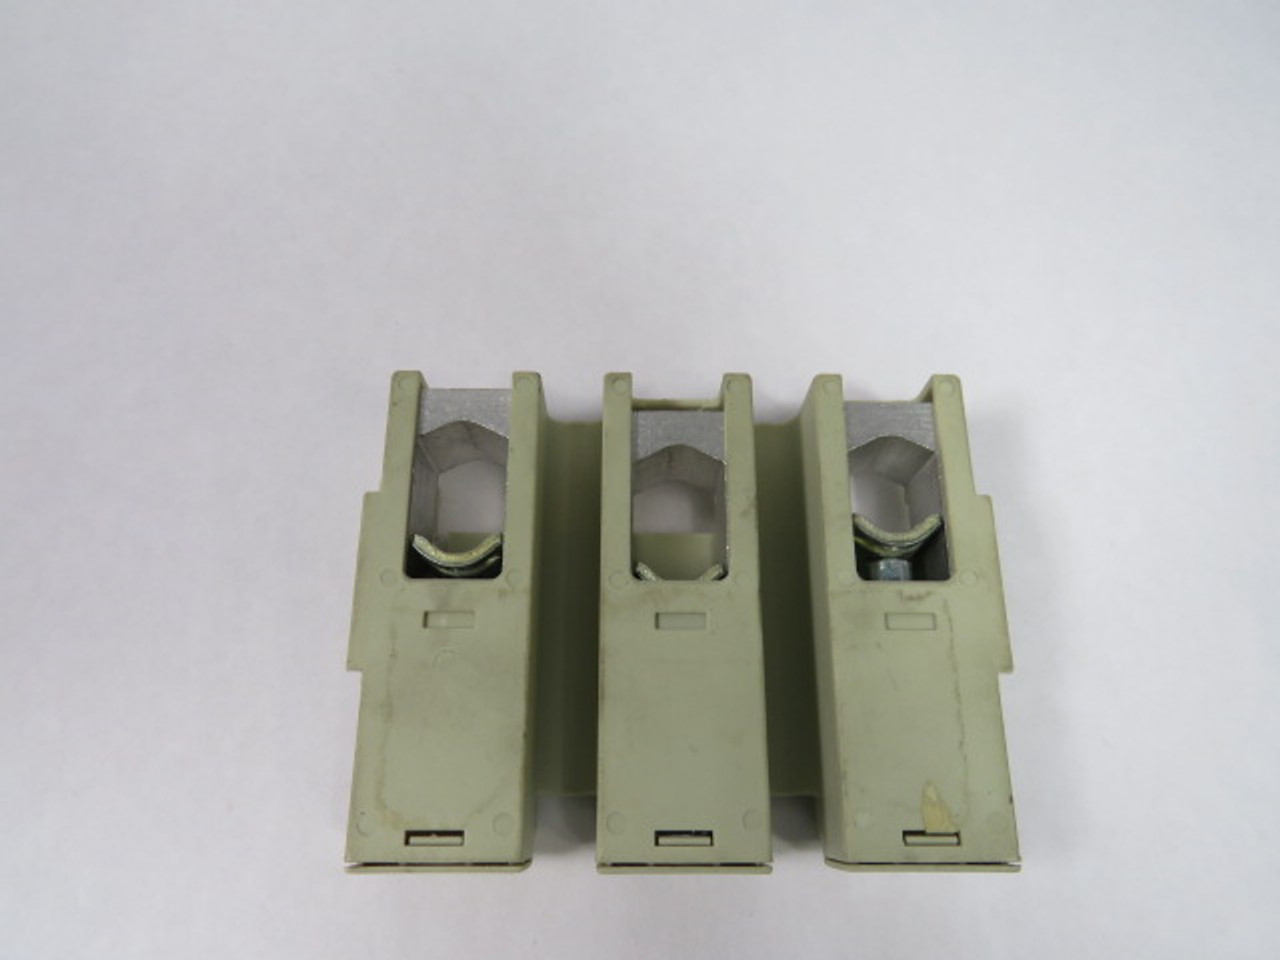 Siemens 3TX7500-0E Terminal Block for 3USF18-50 Current Transformer USED